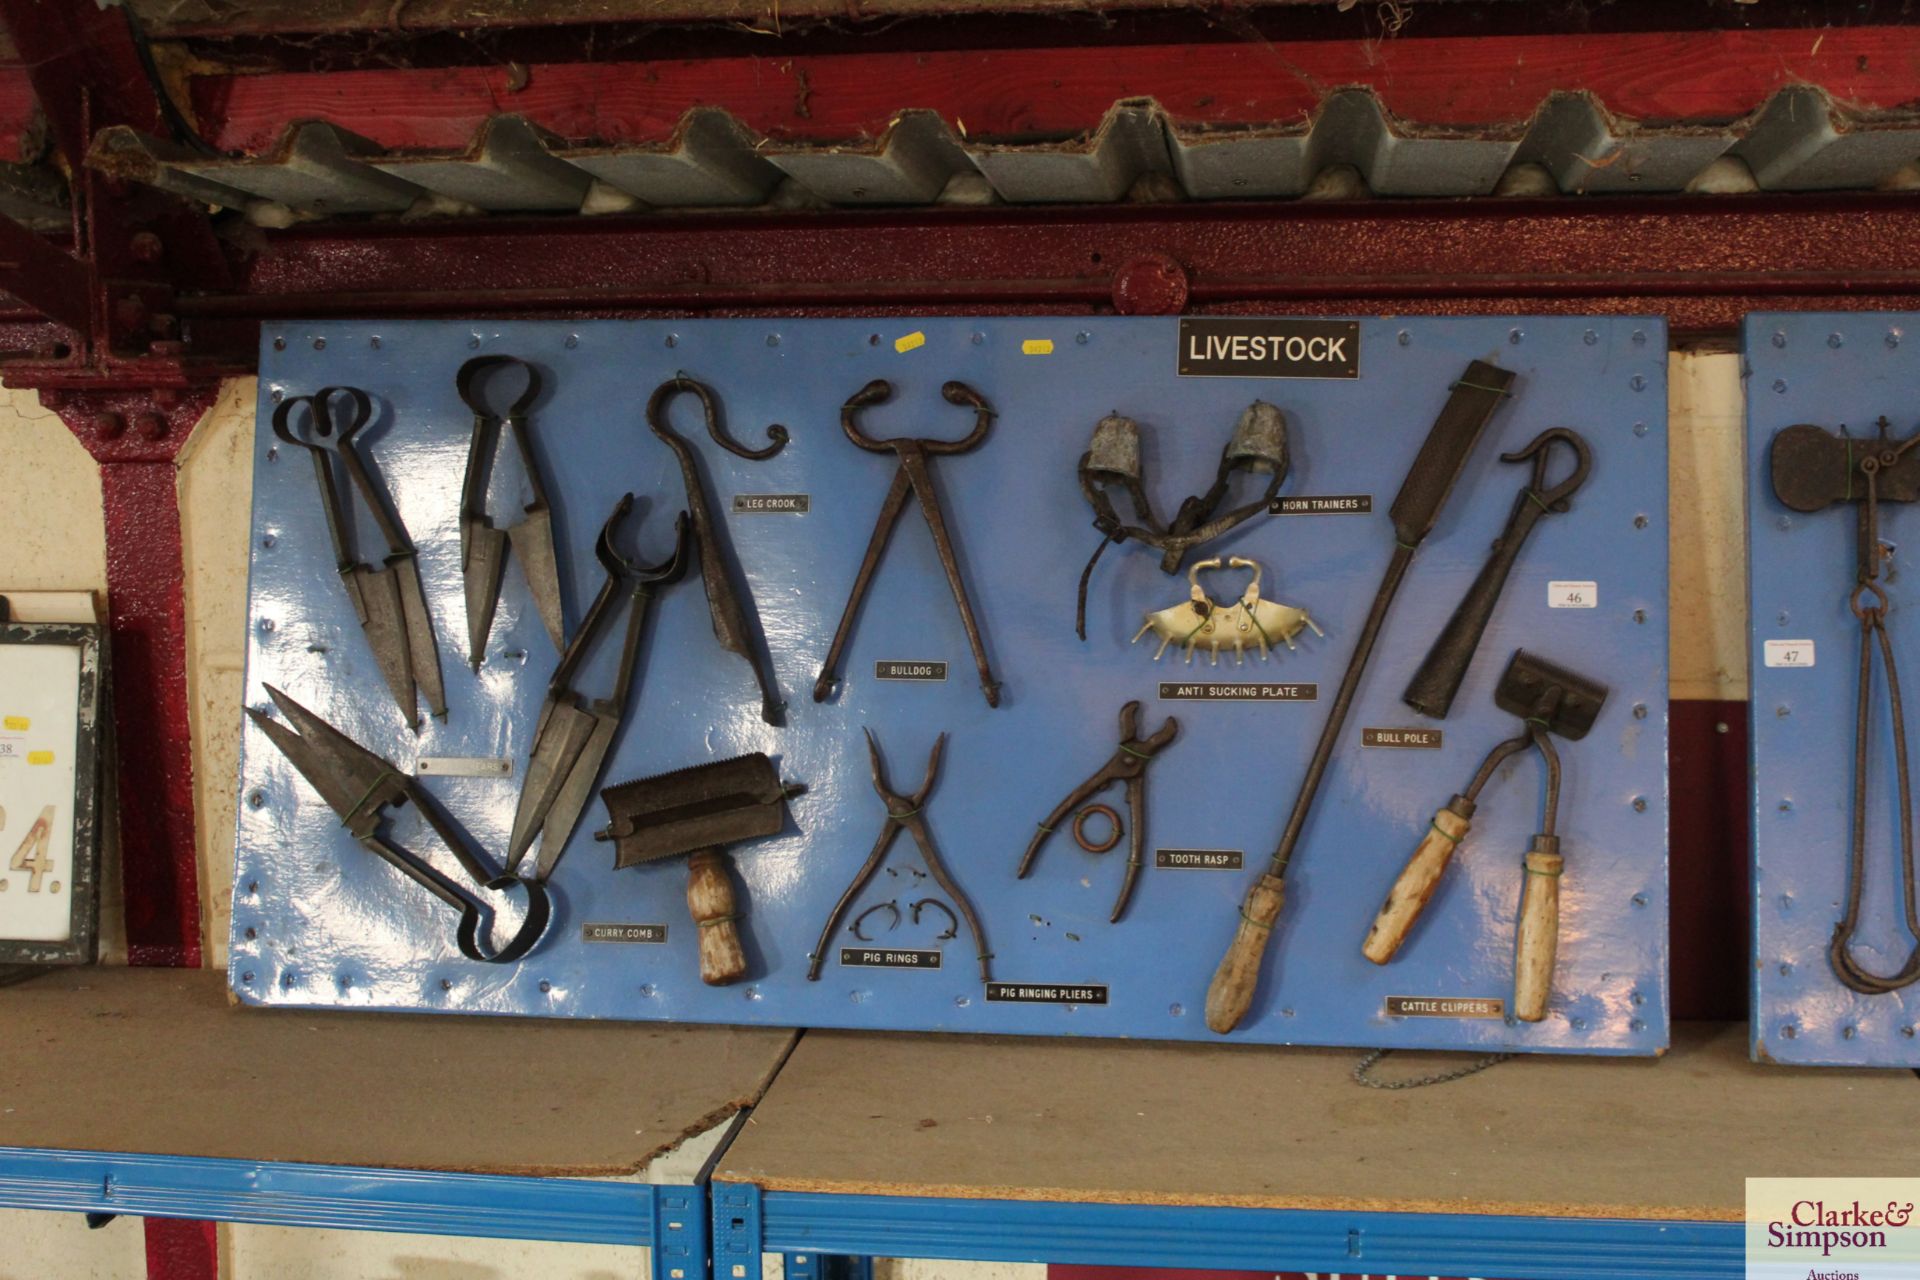 A large display board of Livestock items including sheep shears, pig rings, tooth rasp, anti